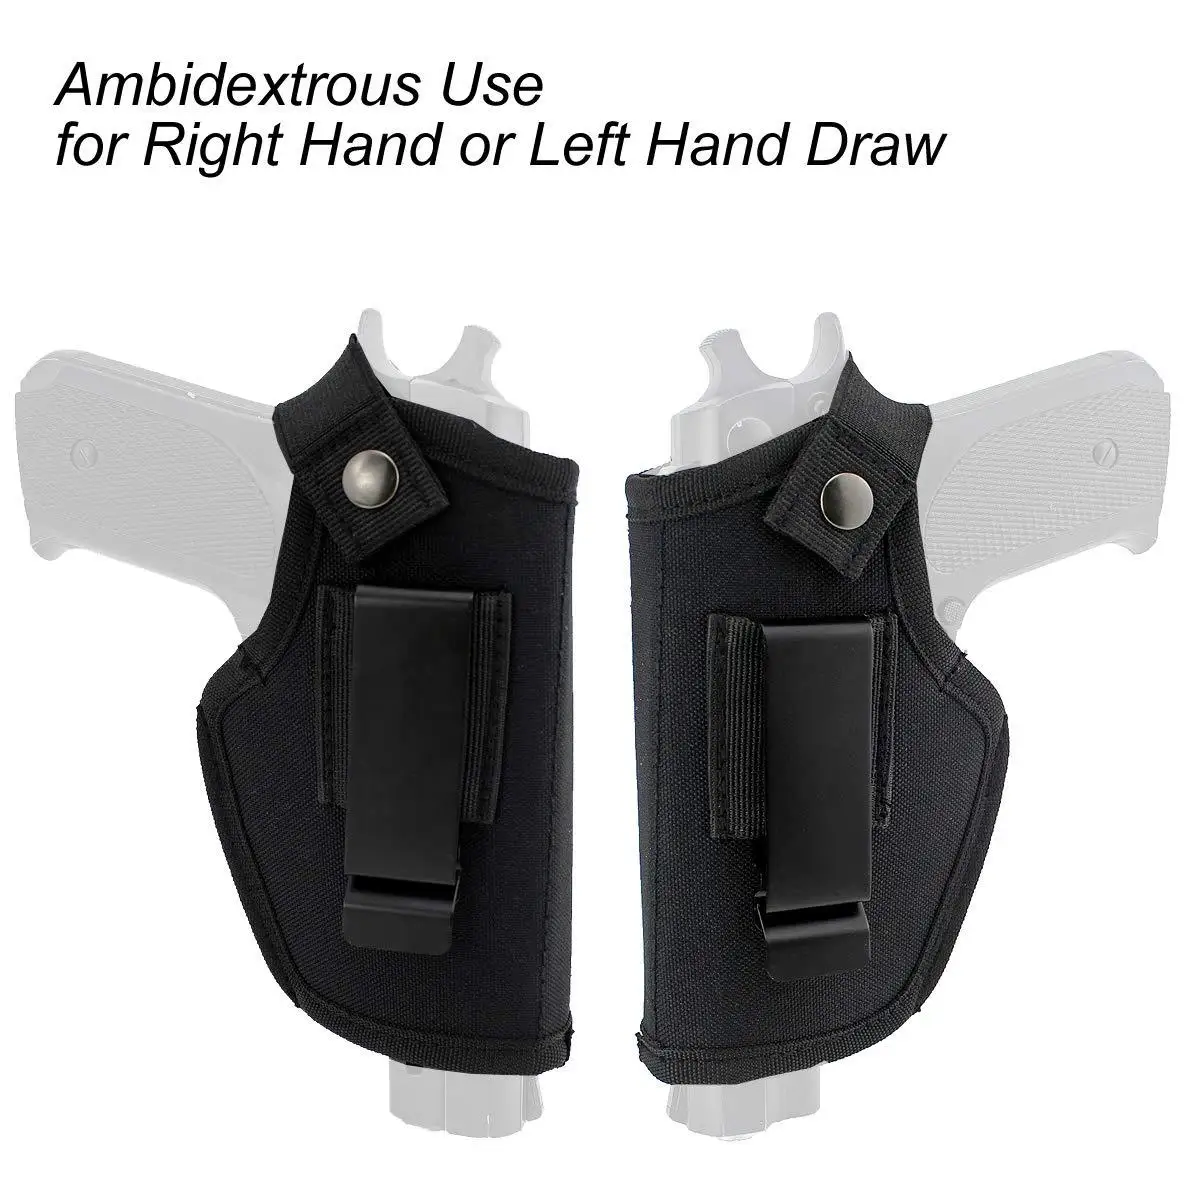 

IWB OWB Holster Concealed Carry Gun Bag Fit for Glock17/19/22/23 Wesson Springfield Xds Mod 2 Taurus G2C 9mm & Millennium Pistol